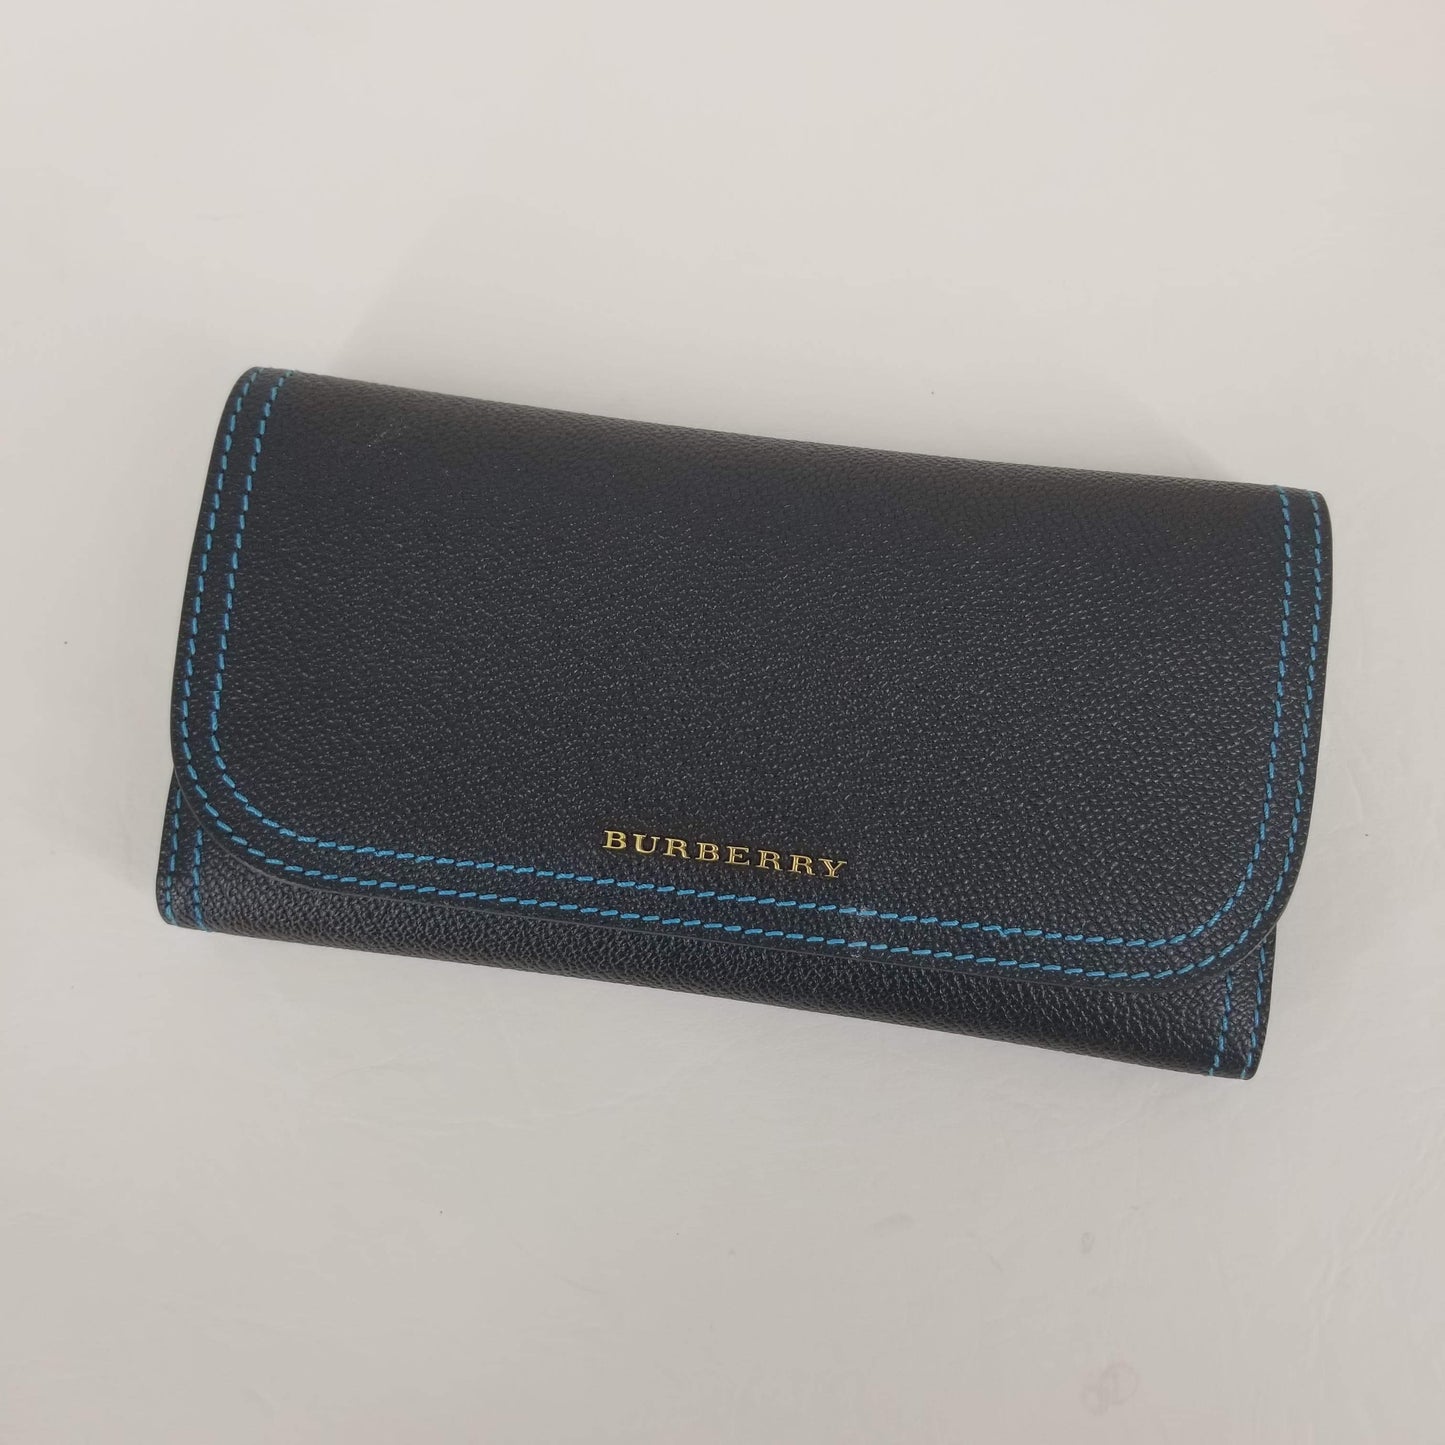 Authentic Burberry Soft Grain Leather Wallet With Card Case